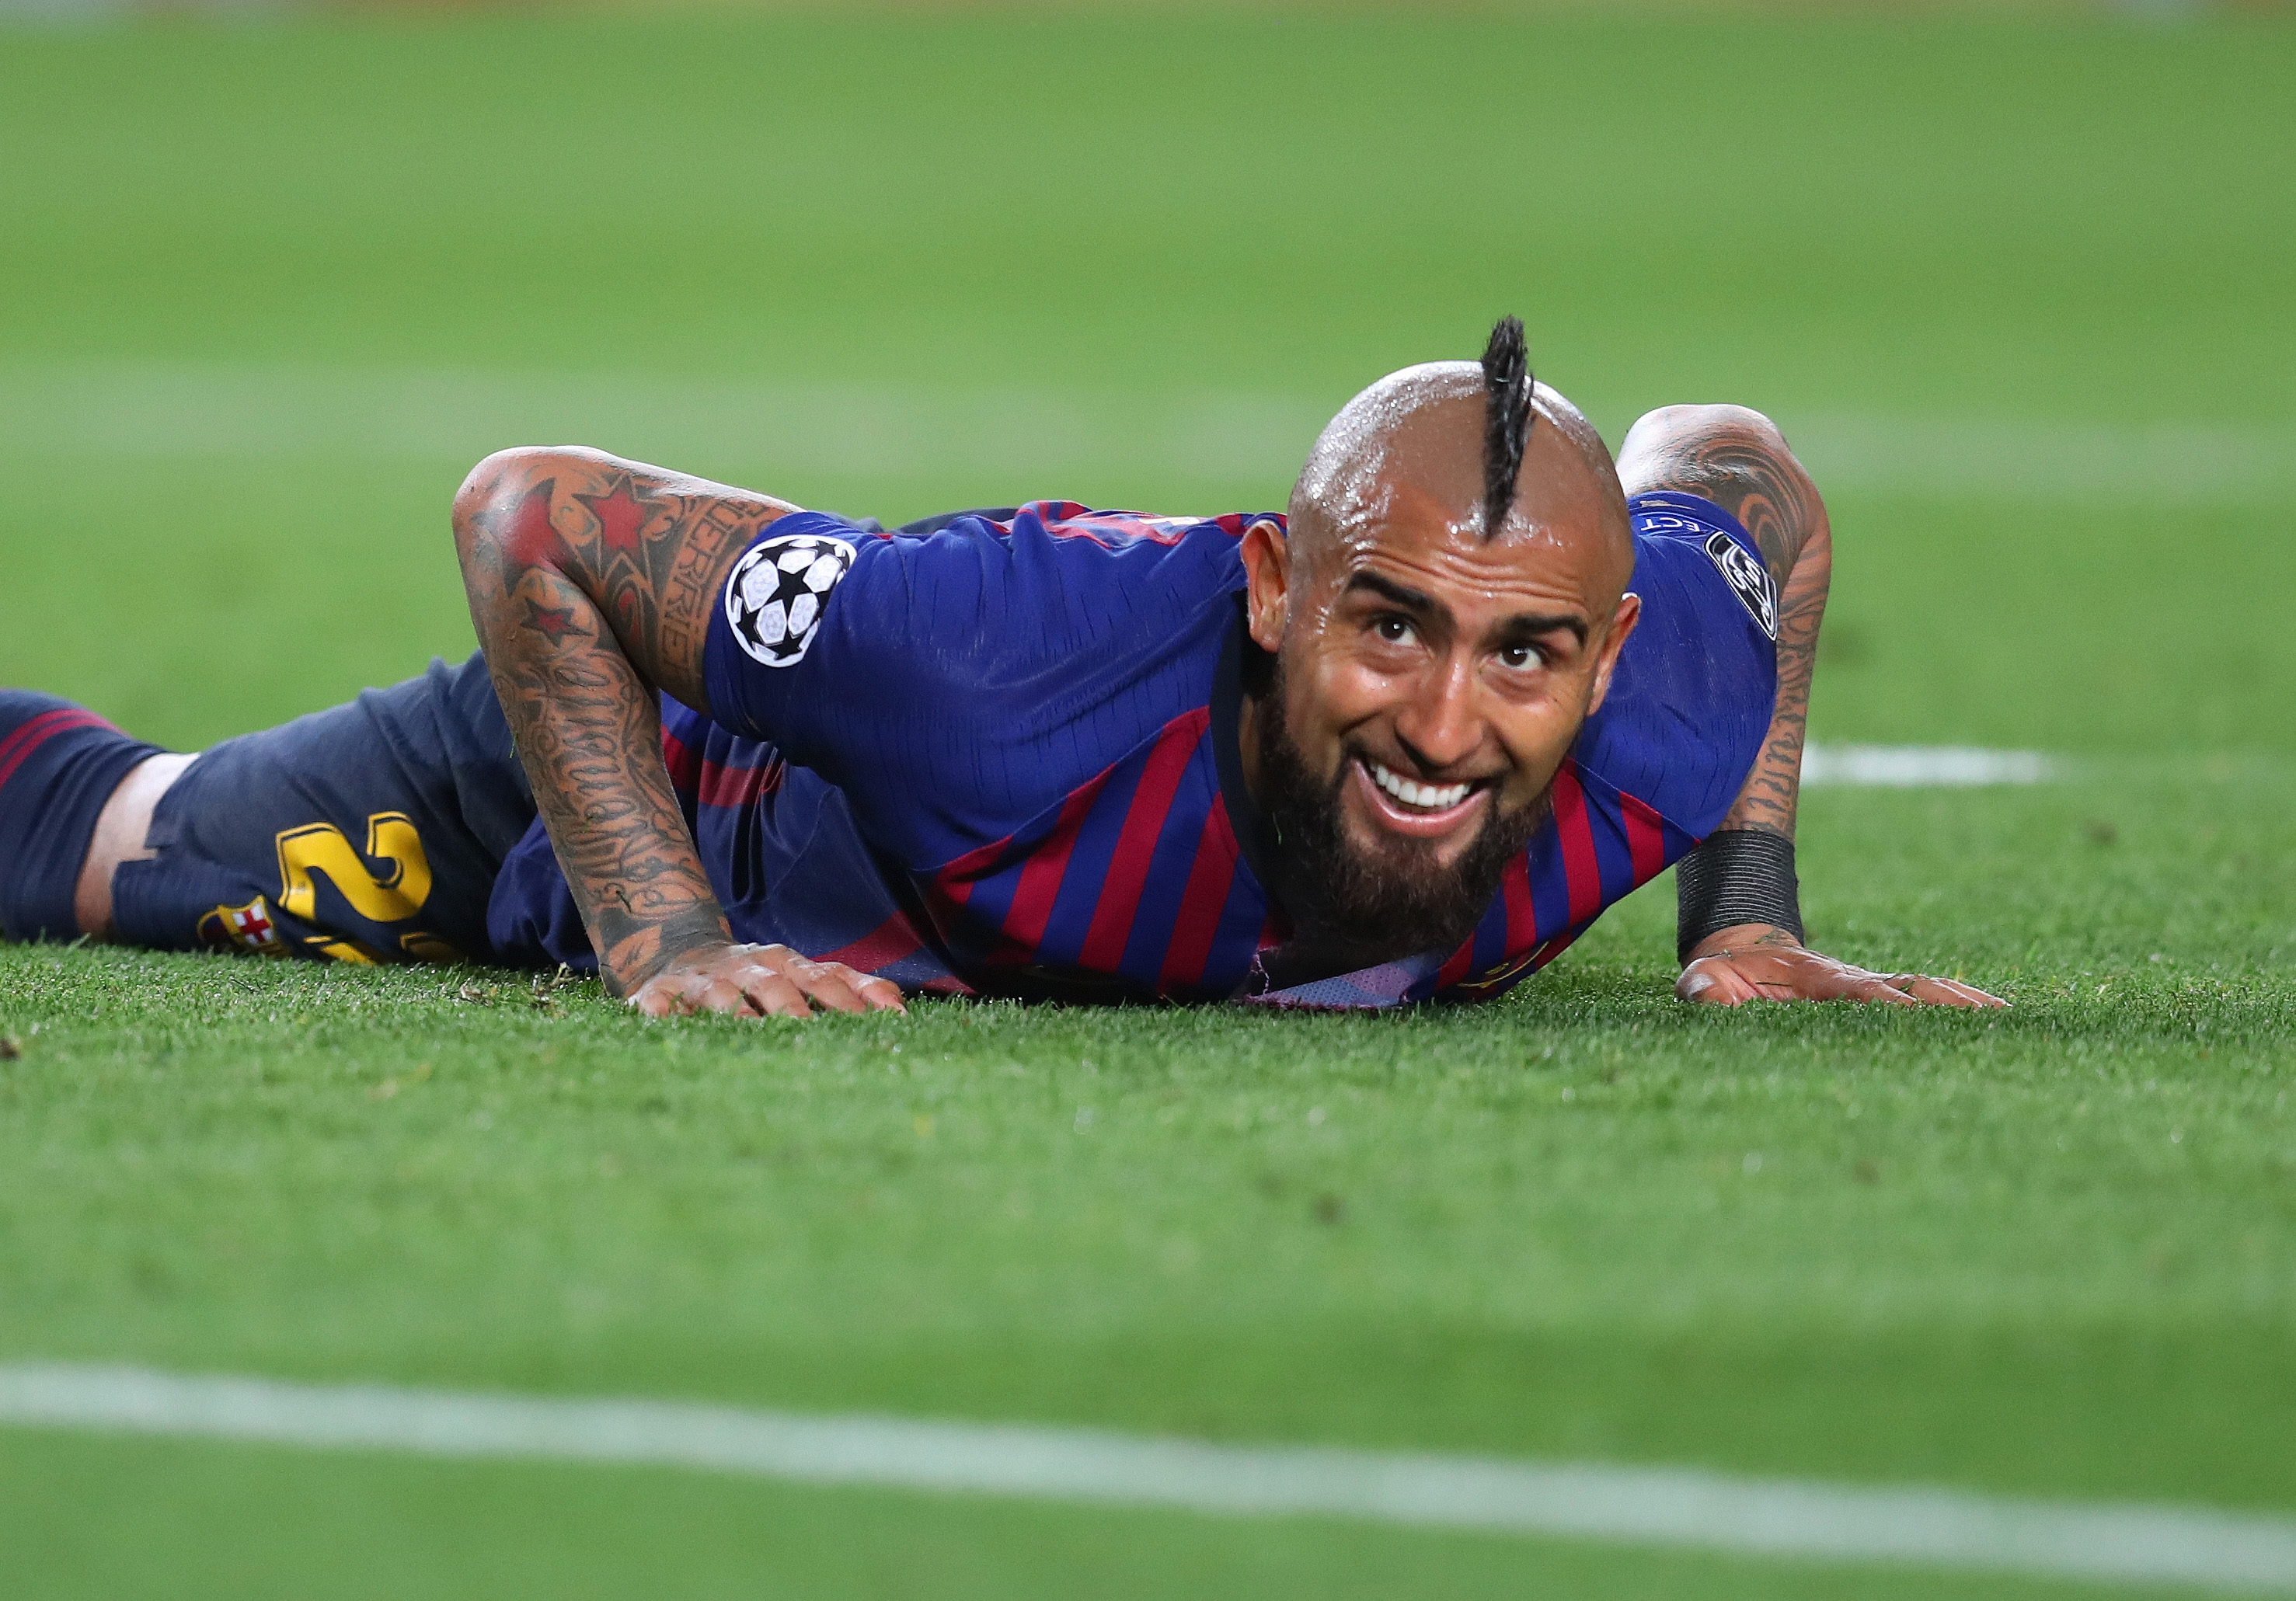 To go to Inter or stay at Barcelona? (Photo courtesy: AFP/Getty)